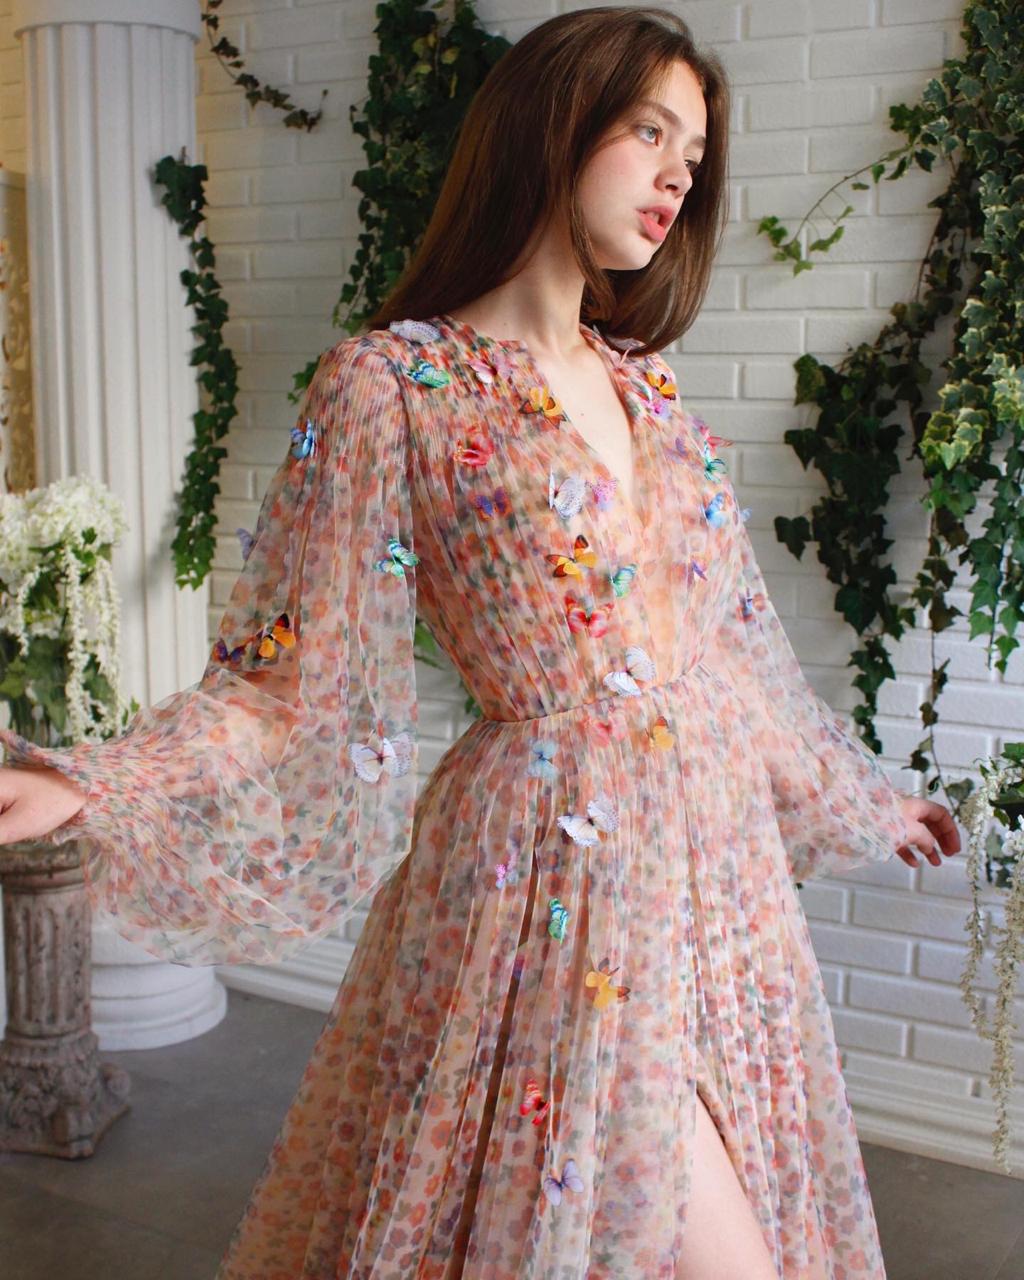 Colorful A-Line dress with v-neck and embroidery